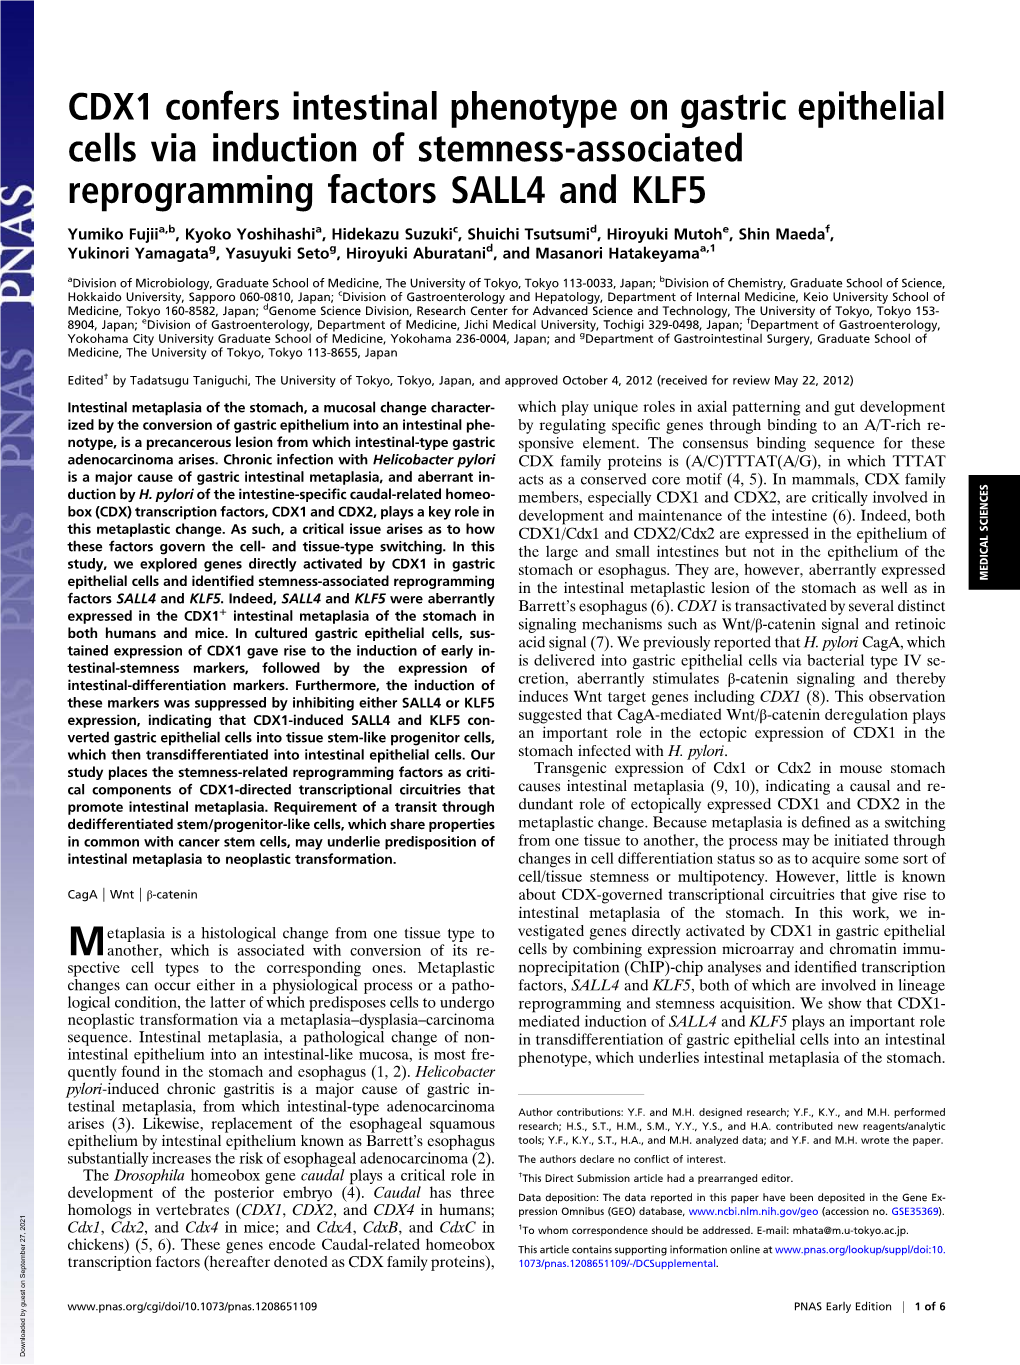 CDX1 Confers Intestinal Phenotype on Gastric Epithelial Cells Via Induction of Stemness-Associated Reprogramming Factors SALL4 and KLF5